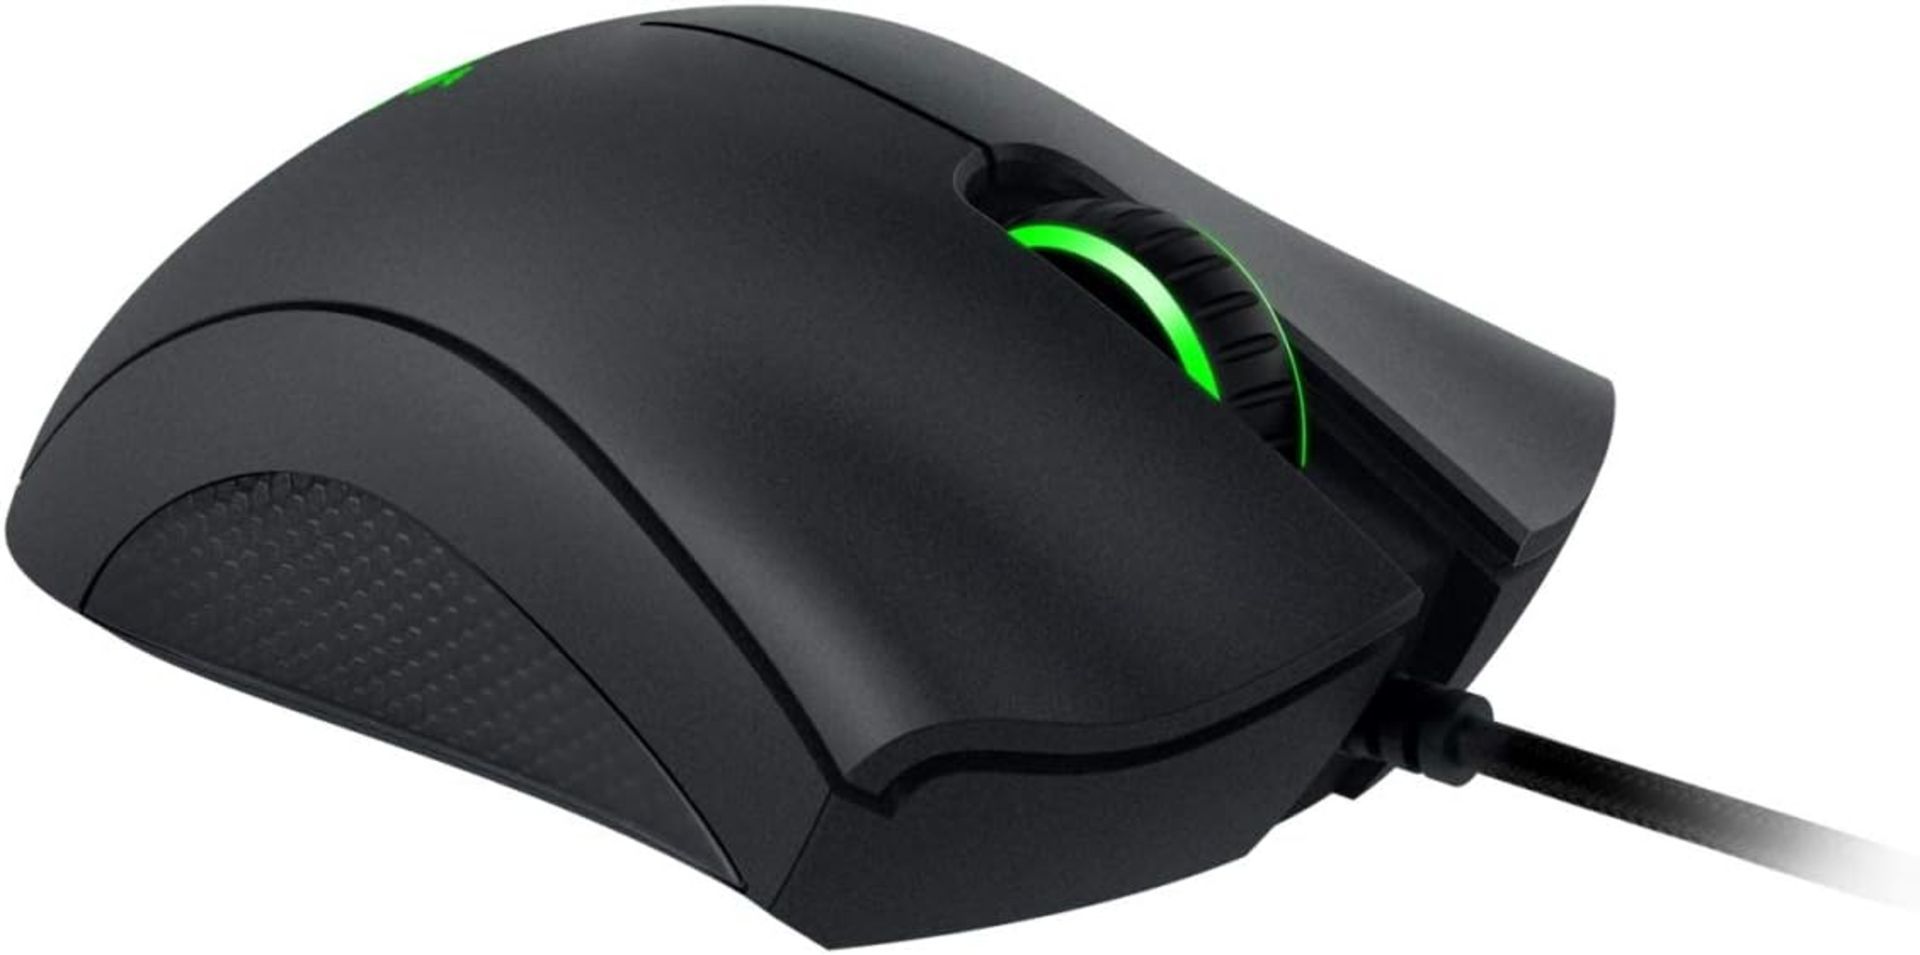 5x BRAND NEW FACTORY SEALED RAZER Deathadder Essential Gaming Mouse. RRP £22.99 EACH. The Razer - Image 3 of 5